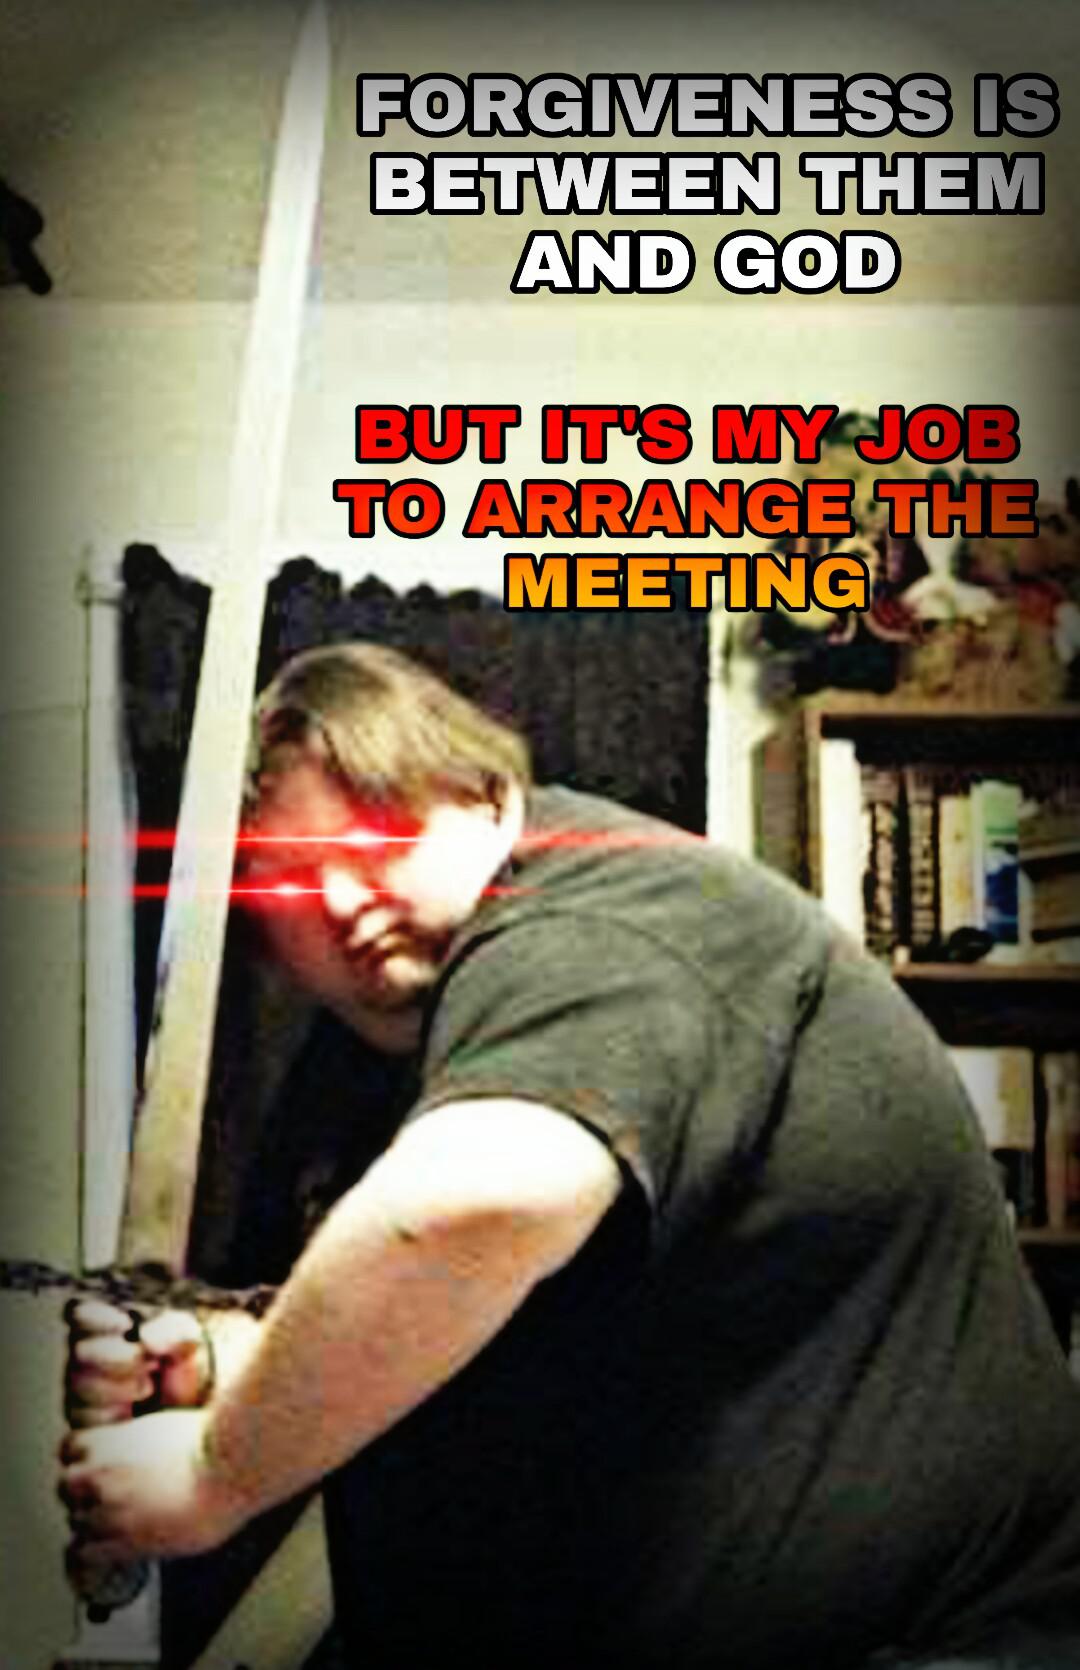 forgiveness is between them and god it's my job to arrange the meeting meme - Forgiveness Is Between Them And God But It'S My Job To Arrange The Meeting